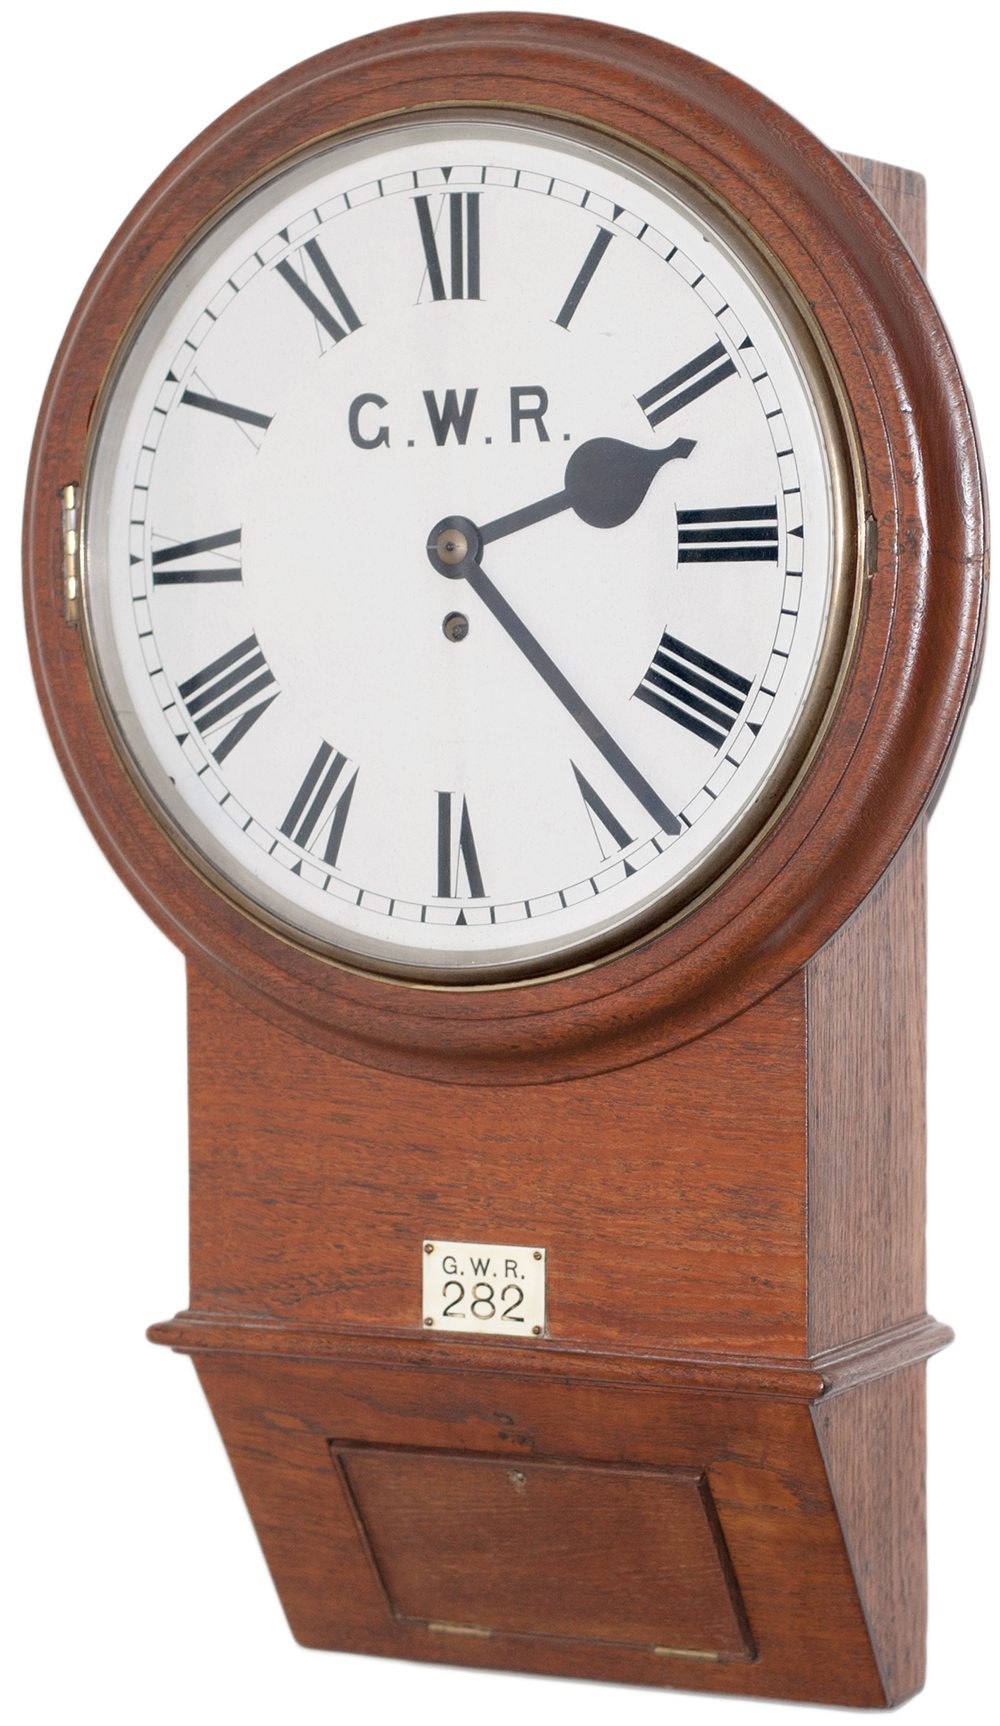 Great Western Railway 12in dial teak cased drop dial railway clock with a chain driven English fusee